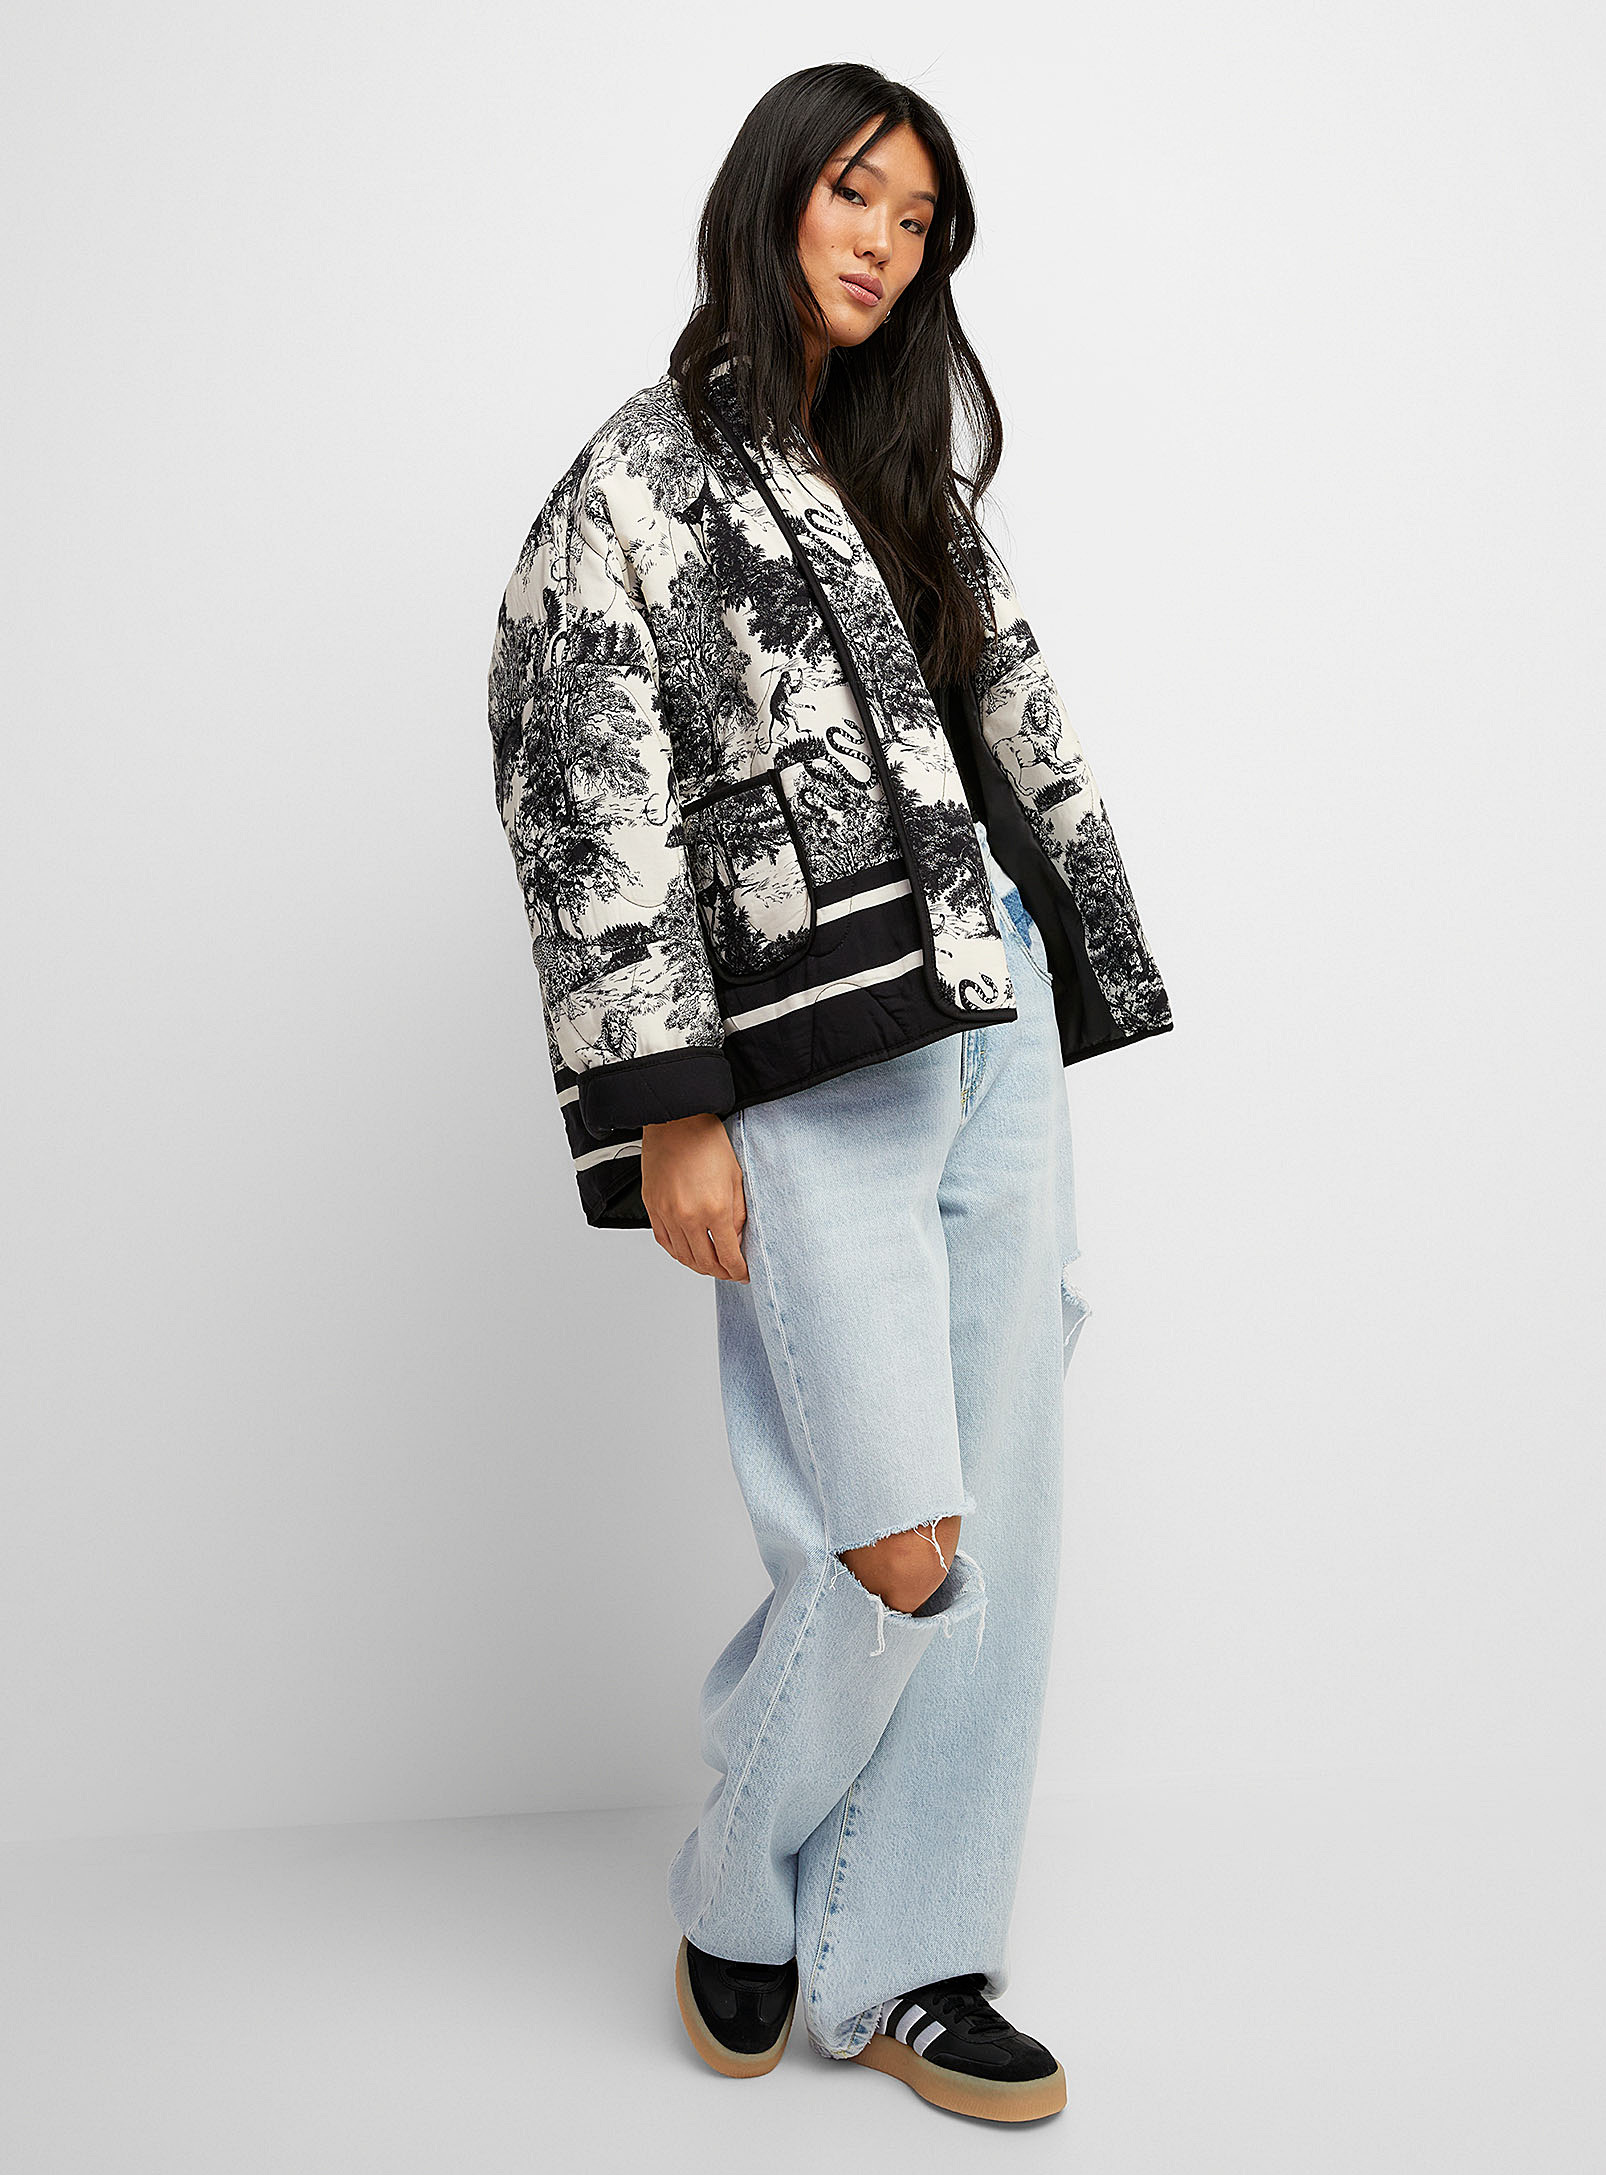 Icone Toile De Jouy Open Quilted Jacket In Black And White